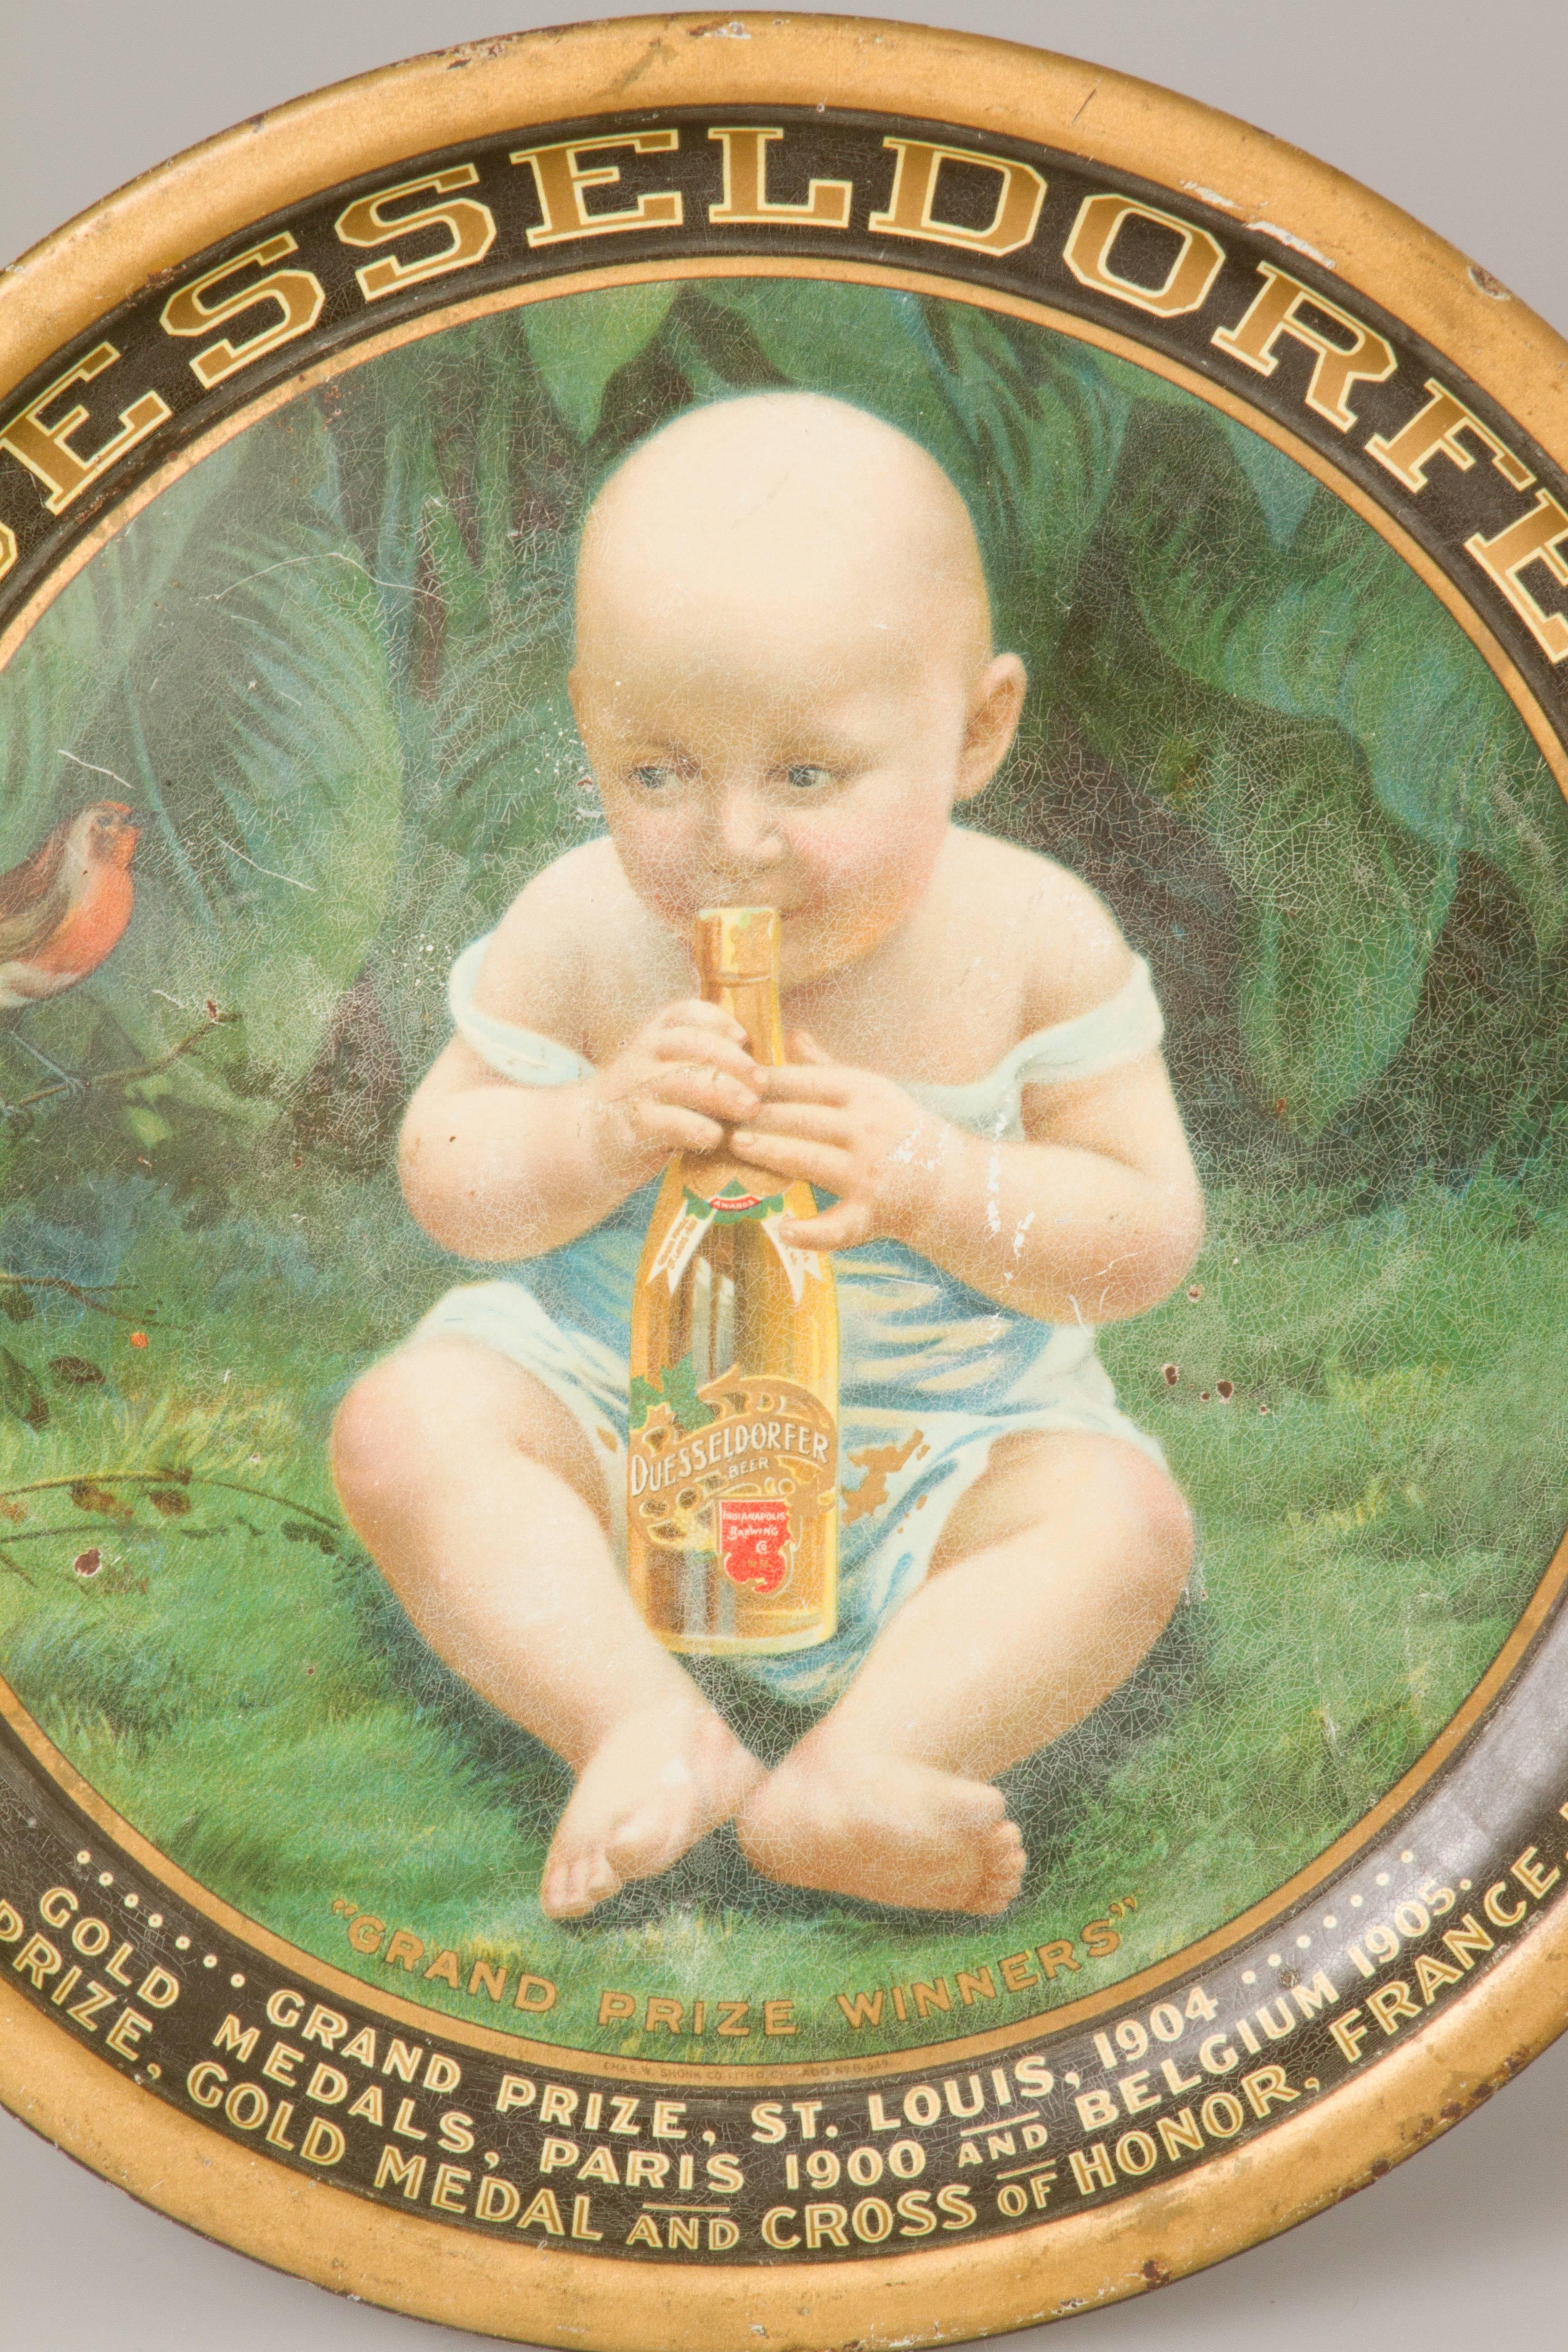 This beer serving tray for Duesseldorfer Beer shows a baby biting the top of one of a beer bottle. This tray lists the medals this company has won along the bottom edge: Grand prize, St. Louis, 1904. Gold medals, Paris, 1900 and Belgium, 1905. Grand